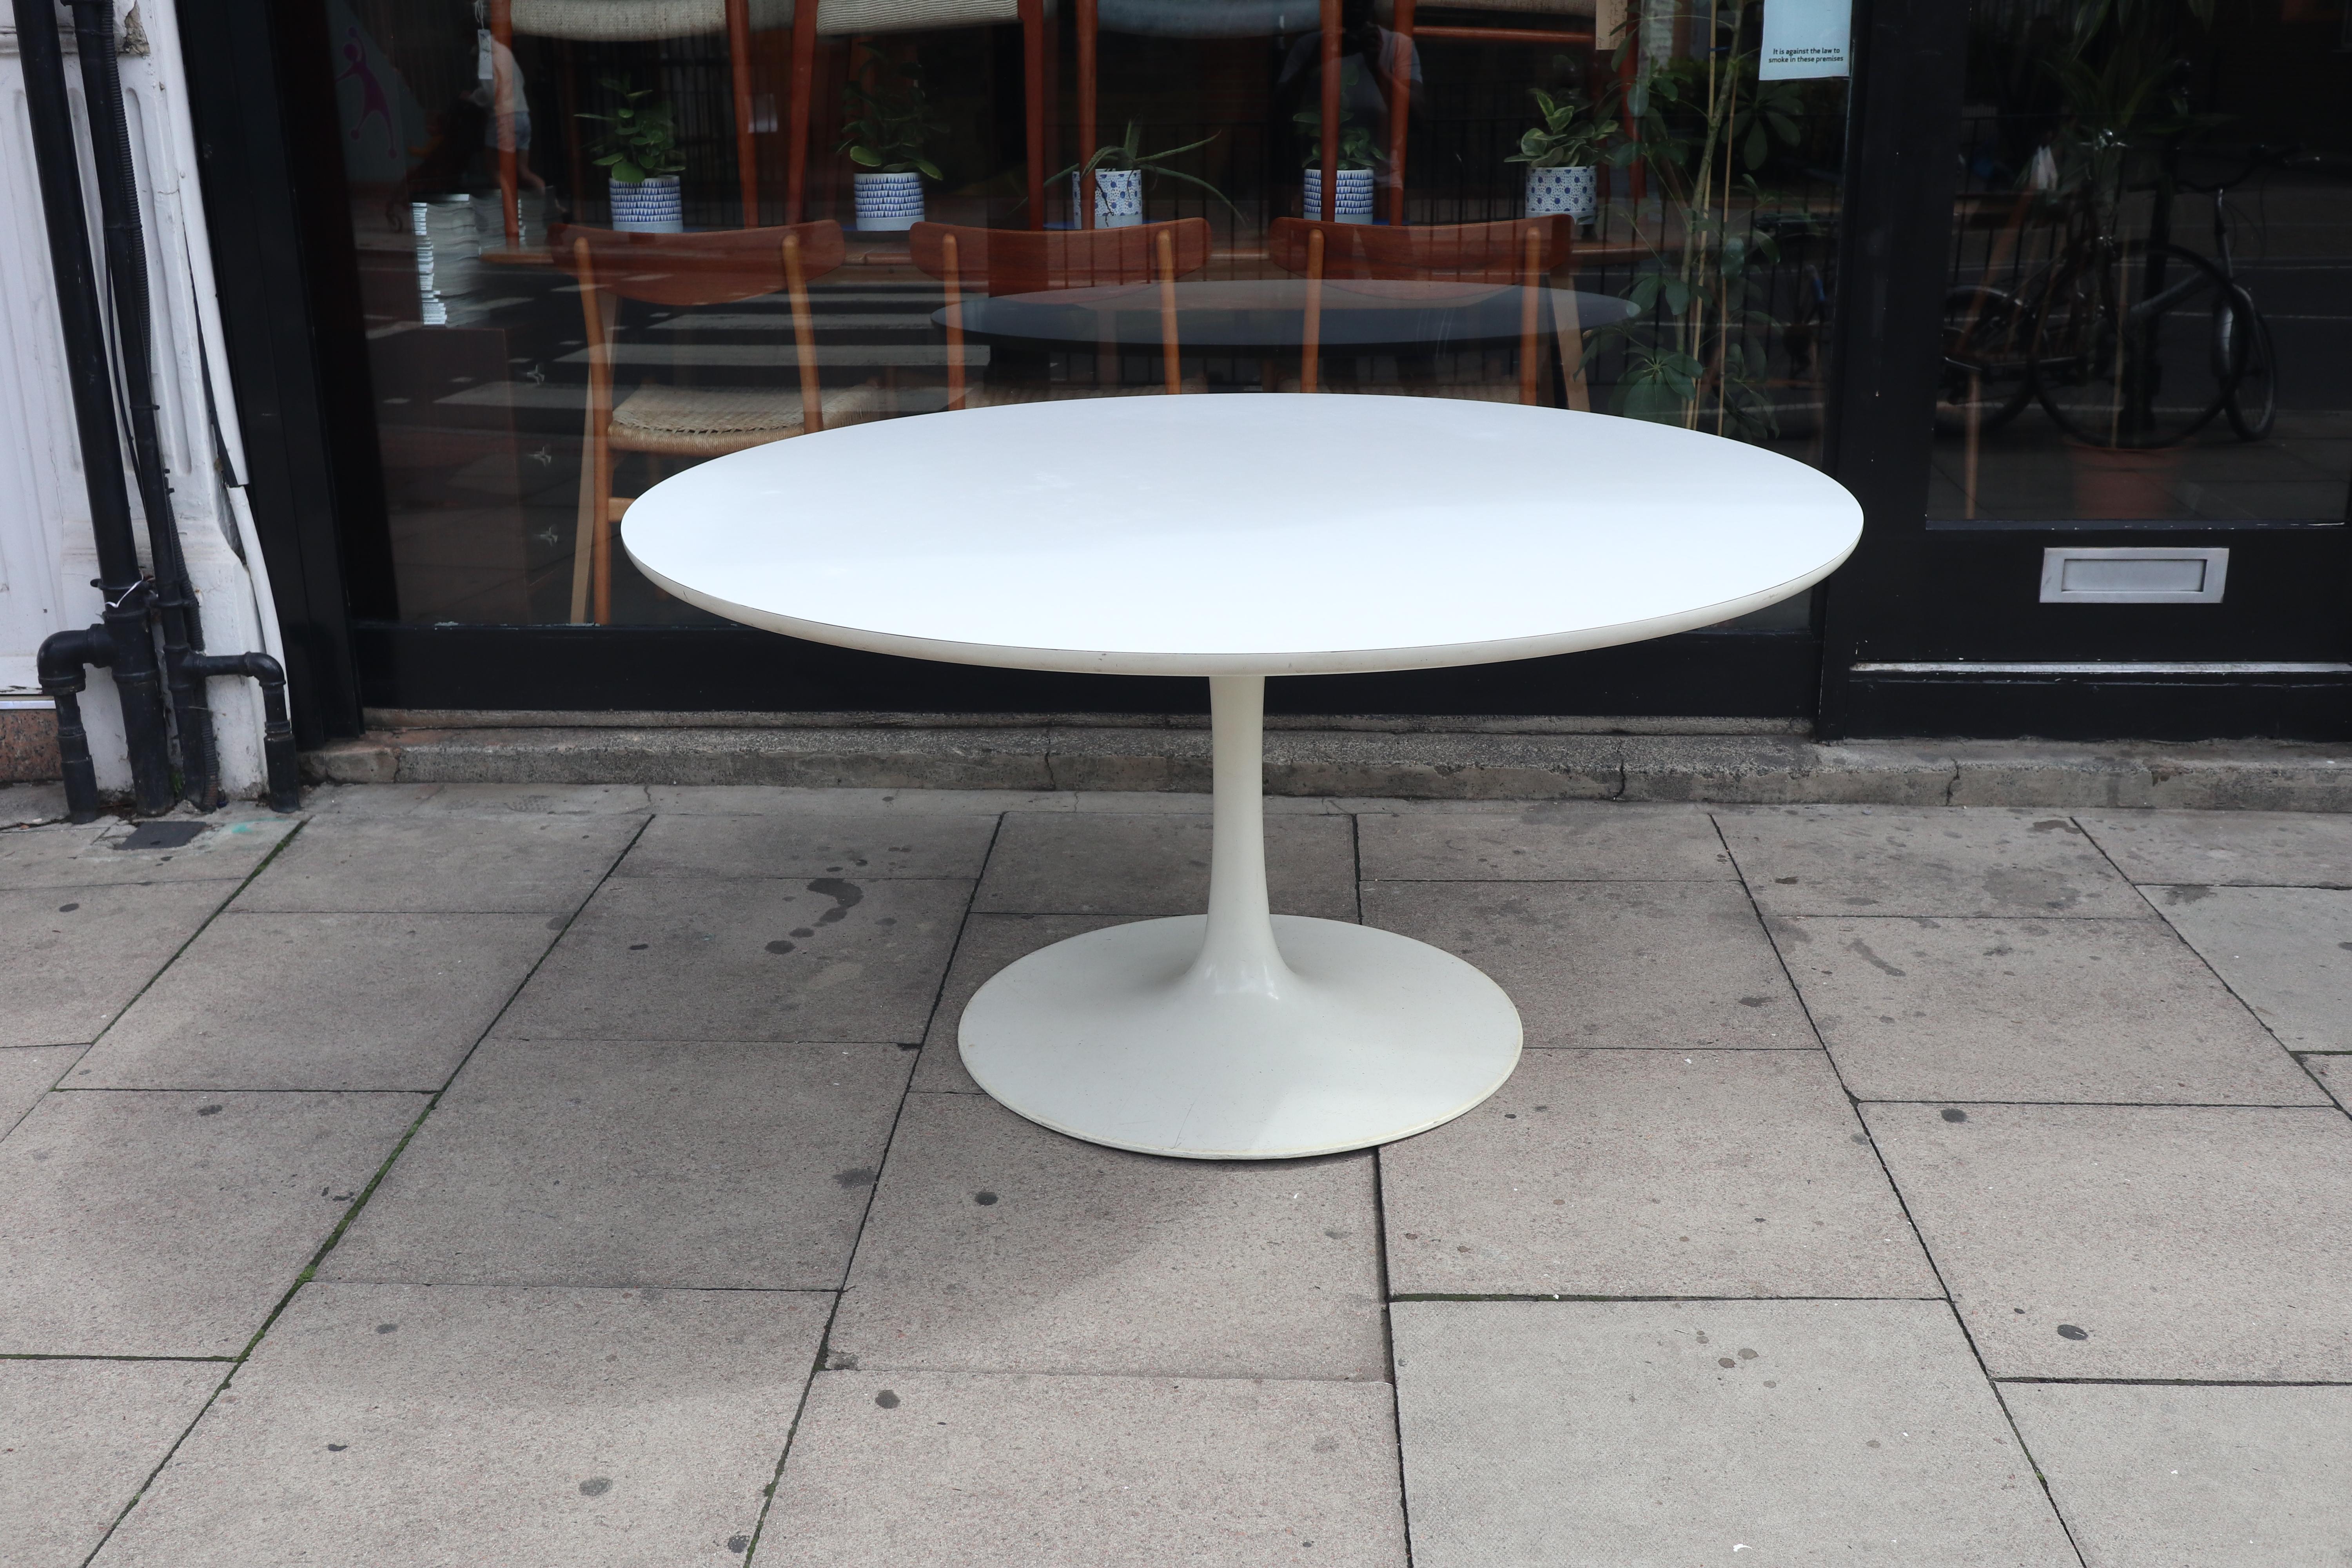 Maurice Burke for Arkana Tulip White Circular Dining Table With Arkana Branded Stamp Mid Century Modern 1960's.  The white laminate top and cast aluminium circular tulip base of this dining table is a mid 20th century design classic. And with the